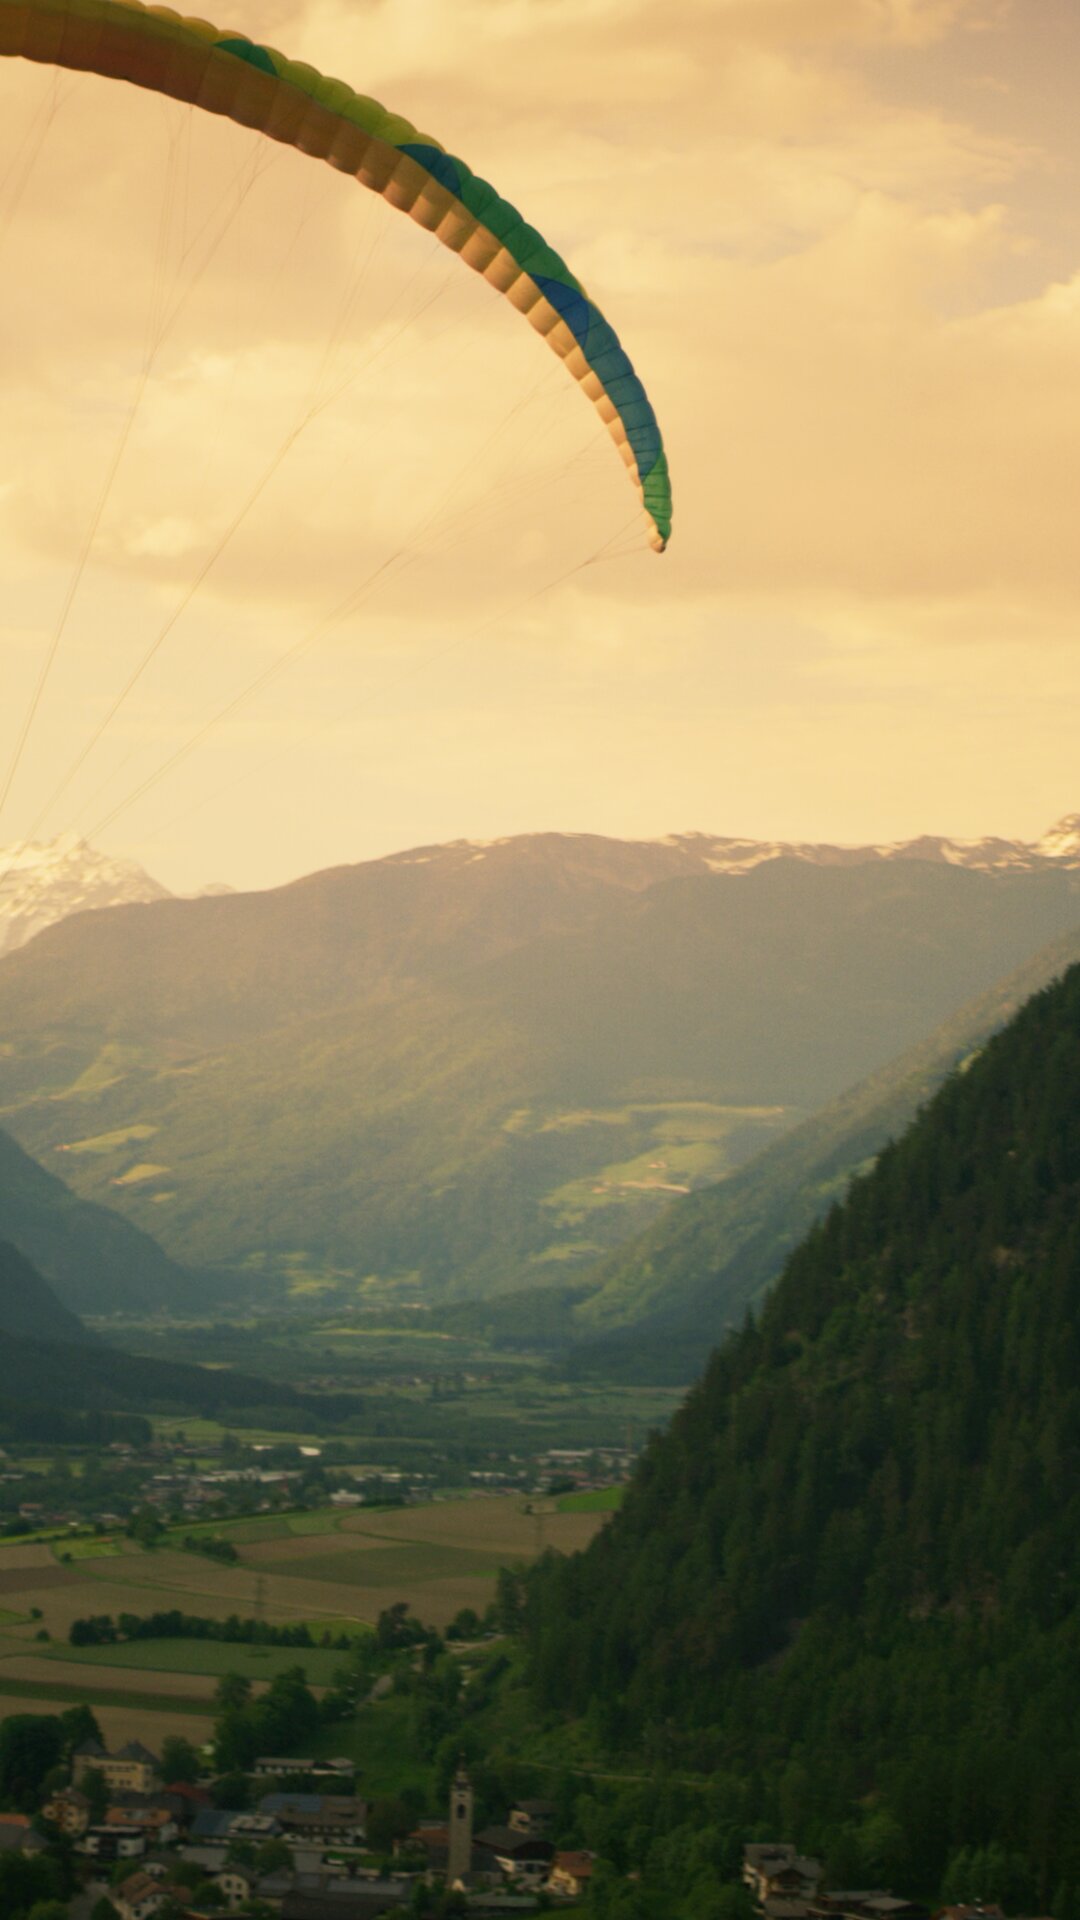 Paragliding with a view